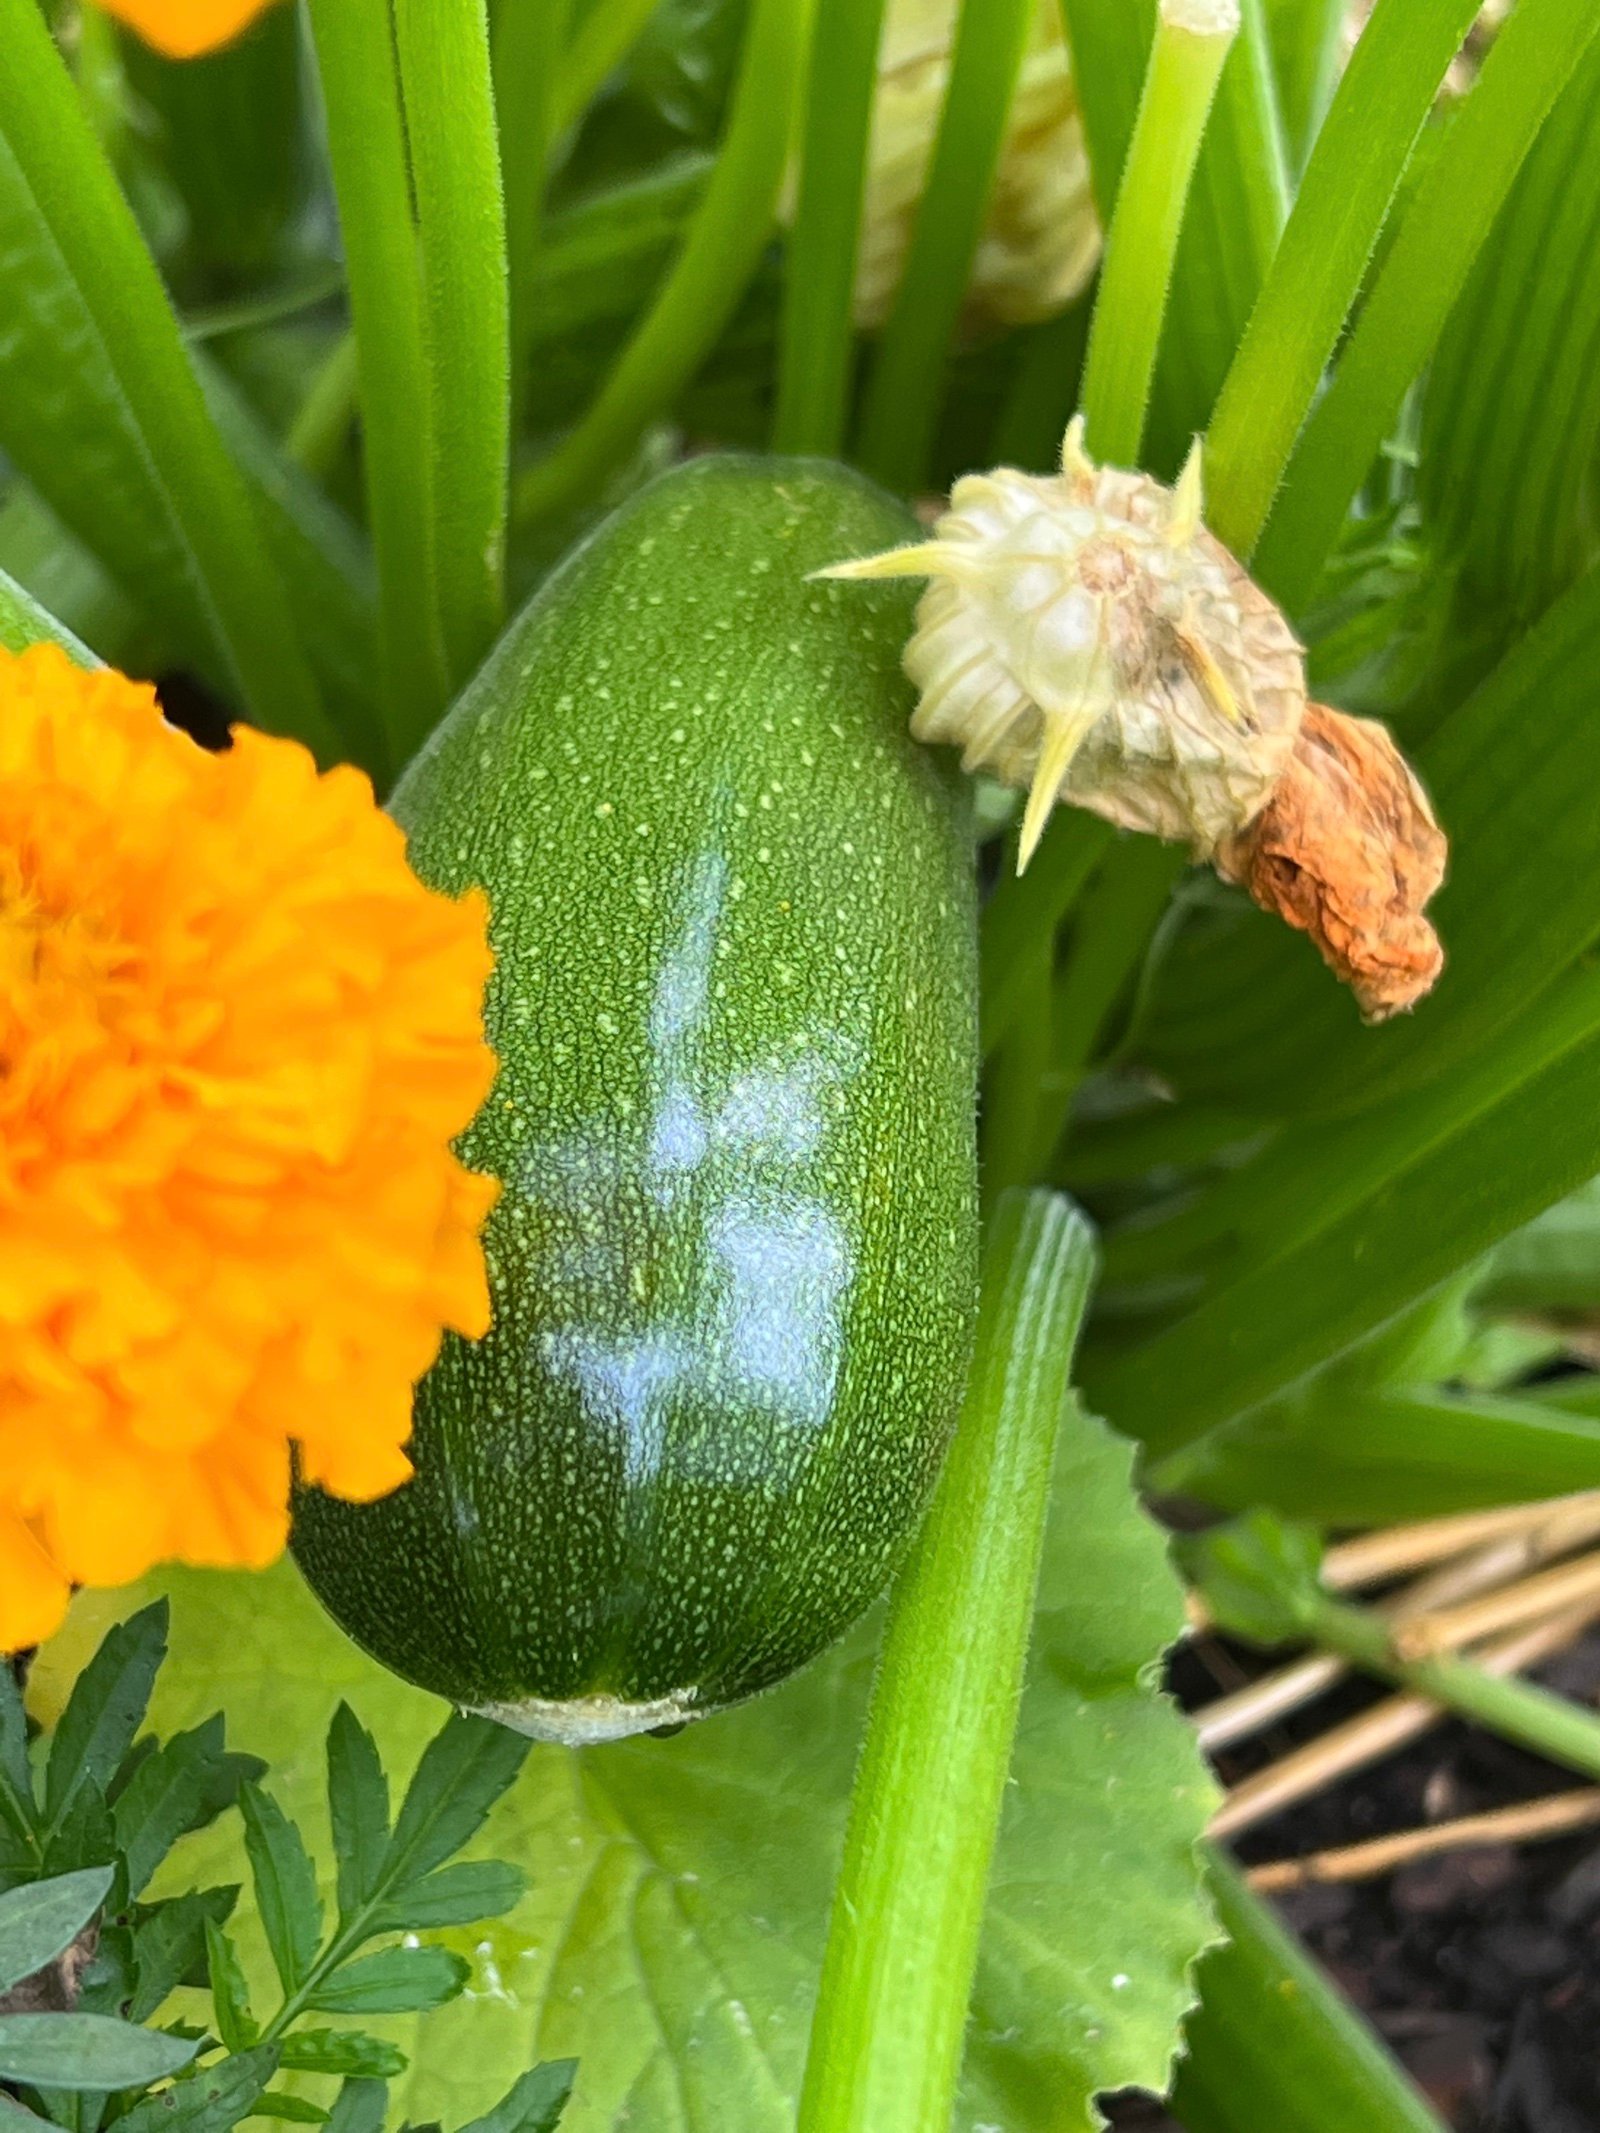 A green zucchini still on the plant with a marigold blossom in the foreground.